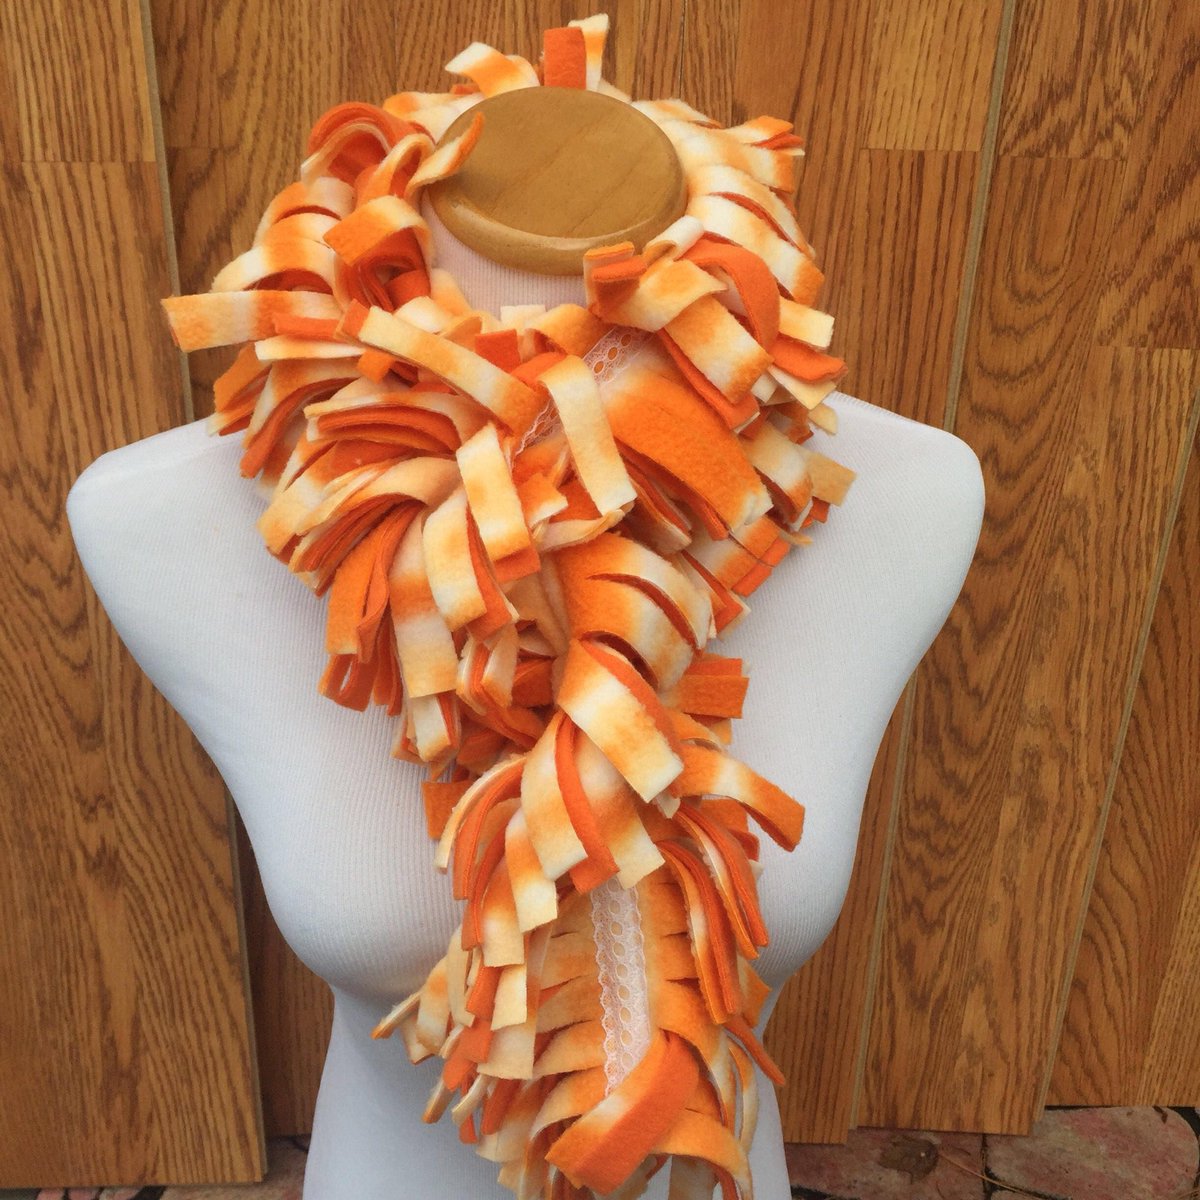 What's not to #love about this shaded #orange #fleecescarf ?! Excited to share the latest addition to our #etsy shop. $19.95 with #freeshipping. #WinterScarf #FringeScarf #giftsunder20 #giftformom #giftforher #stockingstuffer  etsy.me/3DlKOVk etsy.me/3qJ4j6T